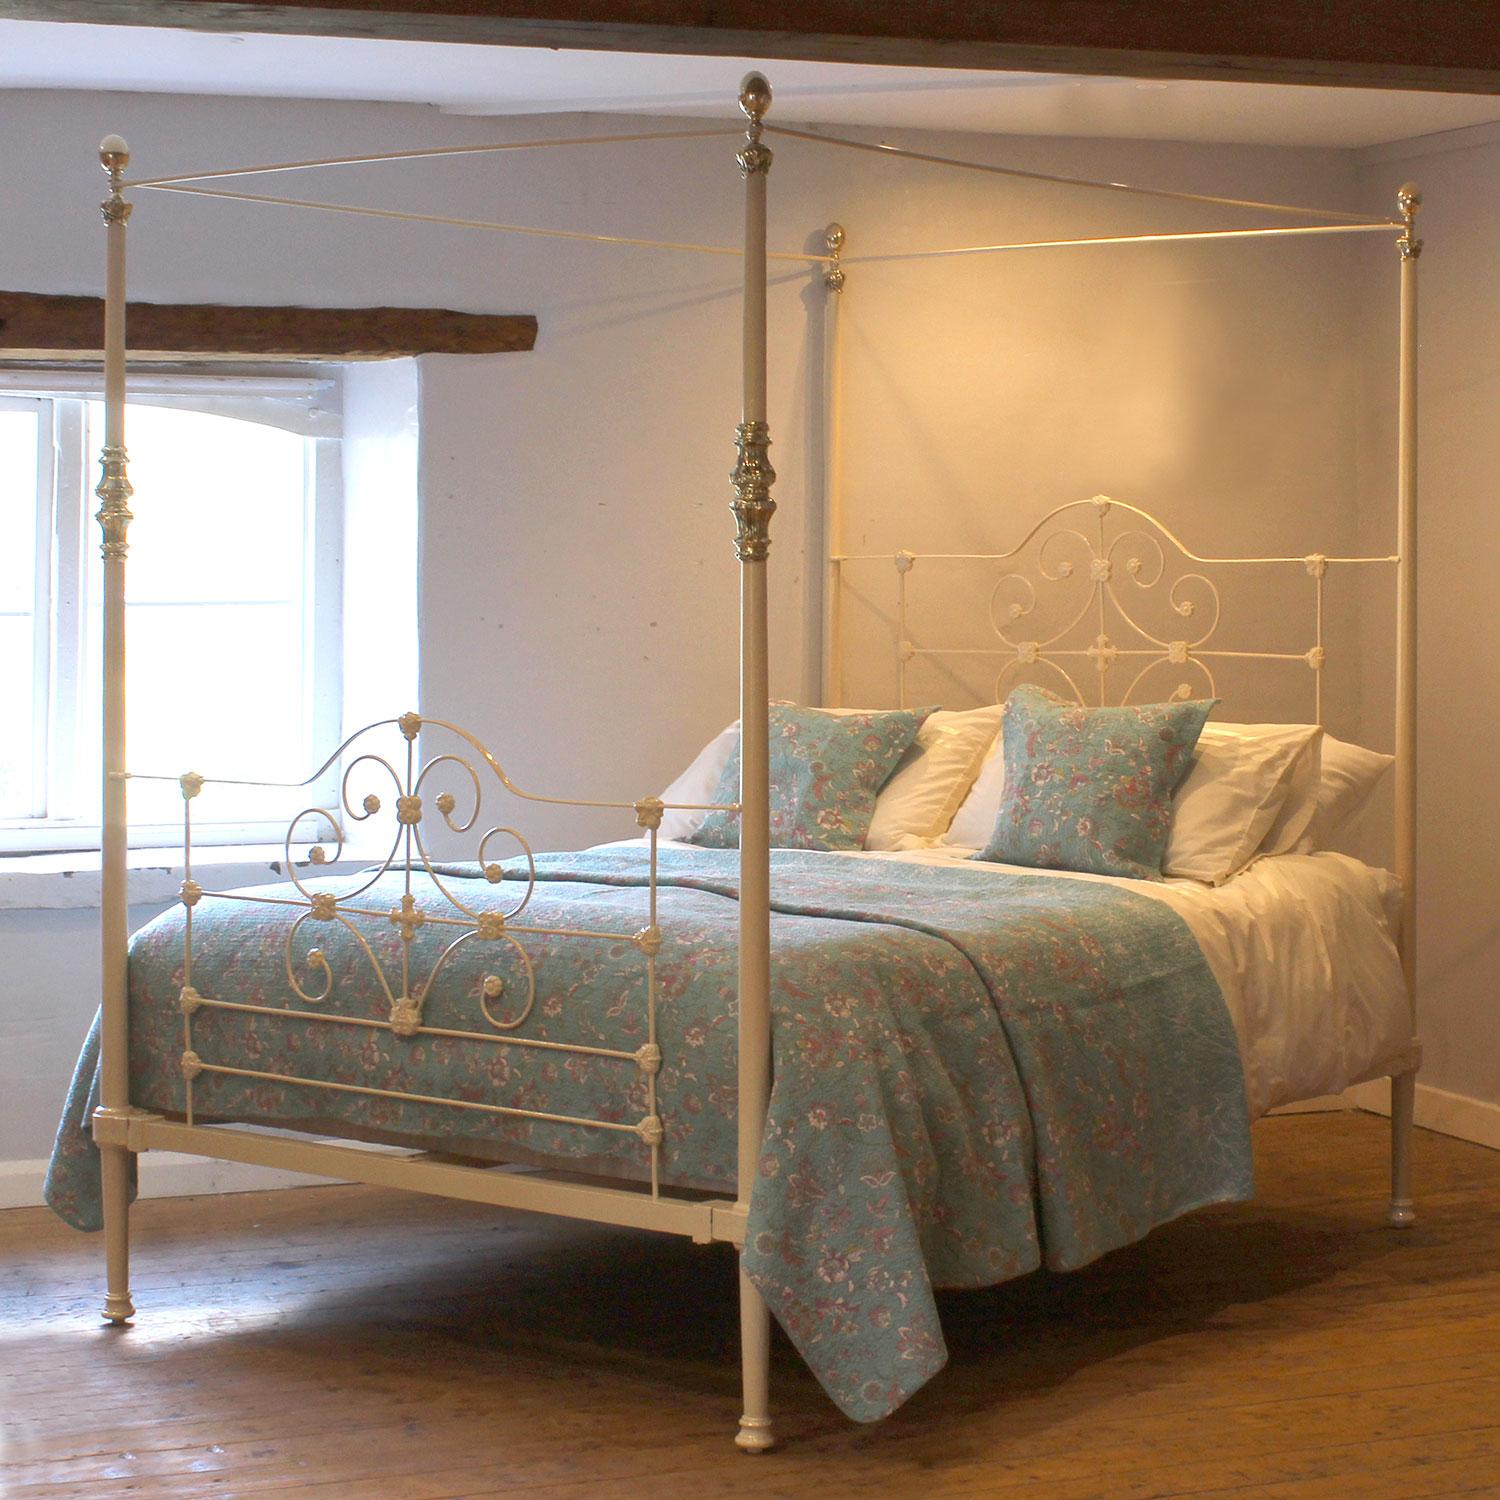 A 5ft wide cast iron antique four poster bed with ornate castings and original brass decoration finished in soft cream with ornate brass fittings and simple panel decoration.

This bed accepts a British King Size or US Queen Size (5ft or 150cm wide)